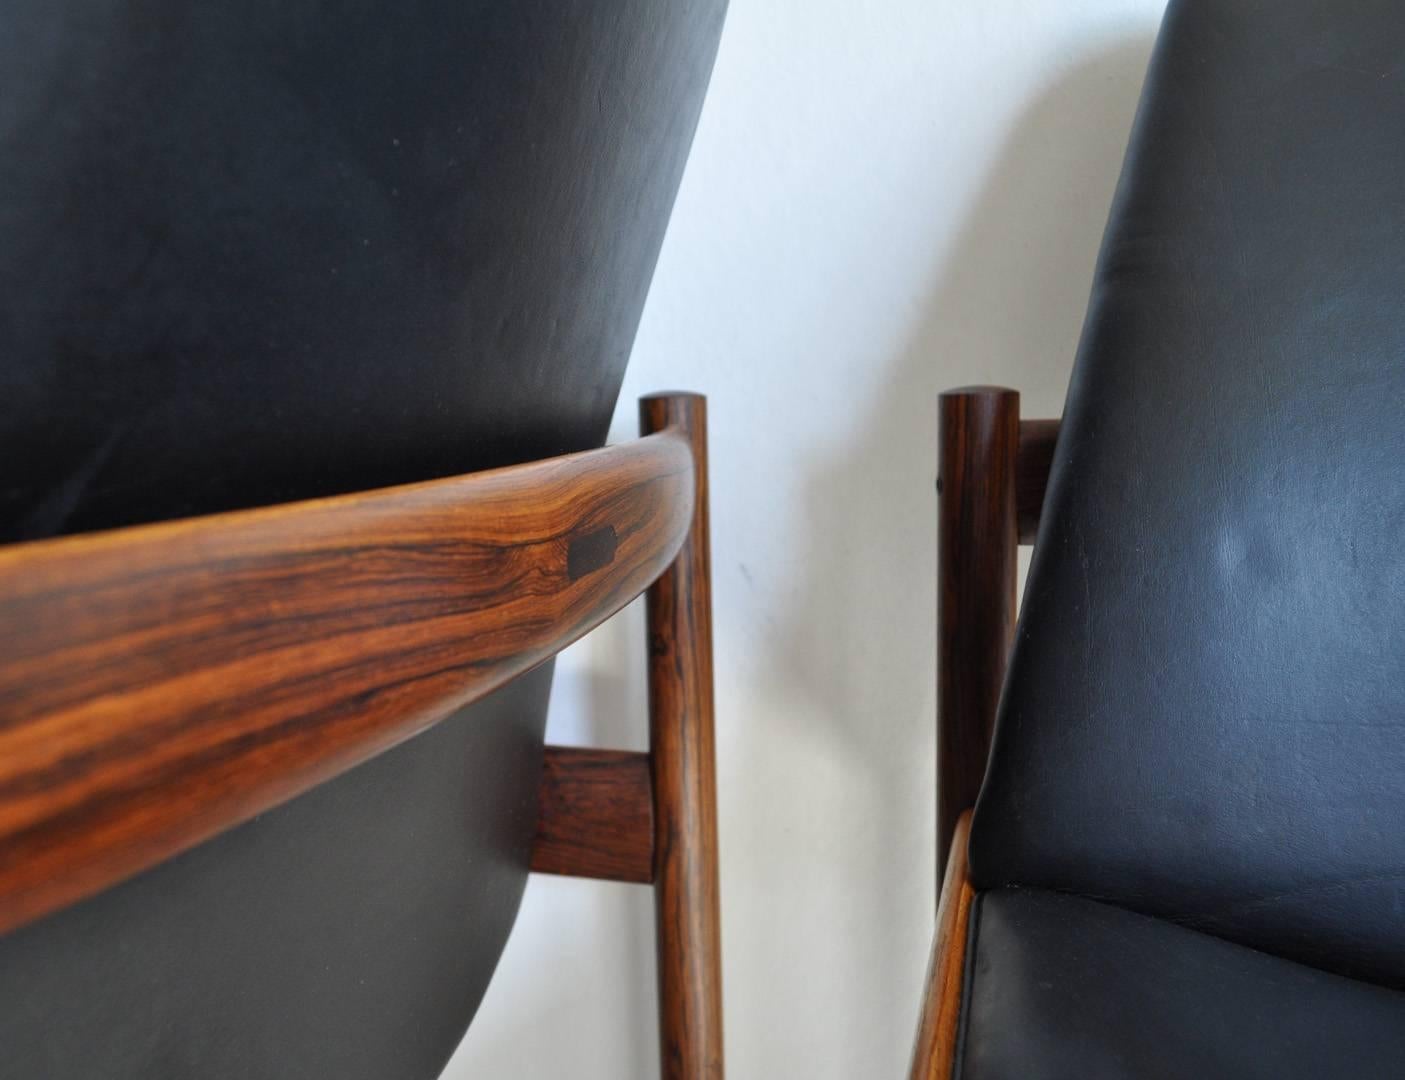 Dining chair by Norwegian designer Sven Ivar Dysthe patinated leather upholstery and a frame of solid rosewood for Dokka Møbler, Norway in the 1960s.

Dimensions:
Width 58 cm
Depth 53 cm
Height 82 cm
Seat height 45 cm.